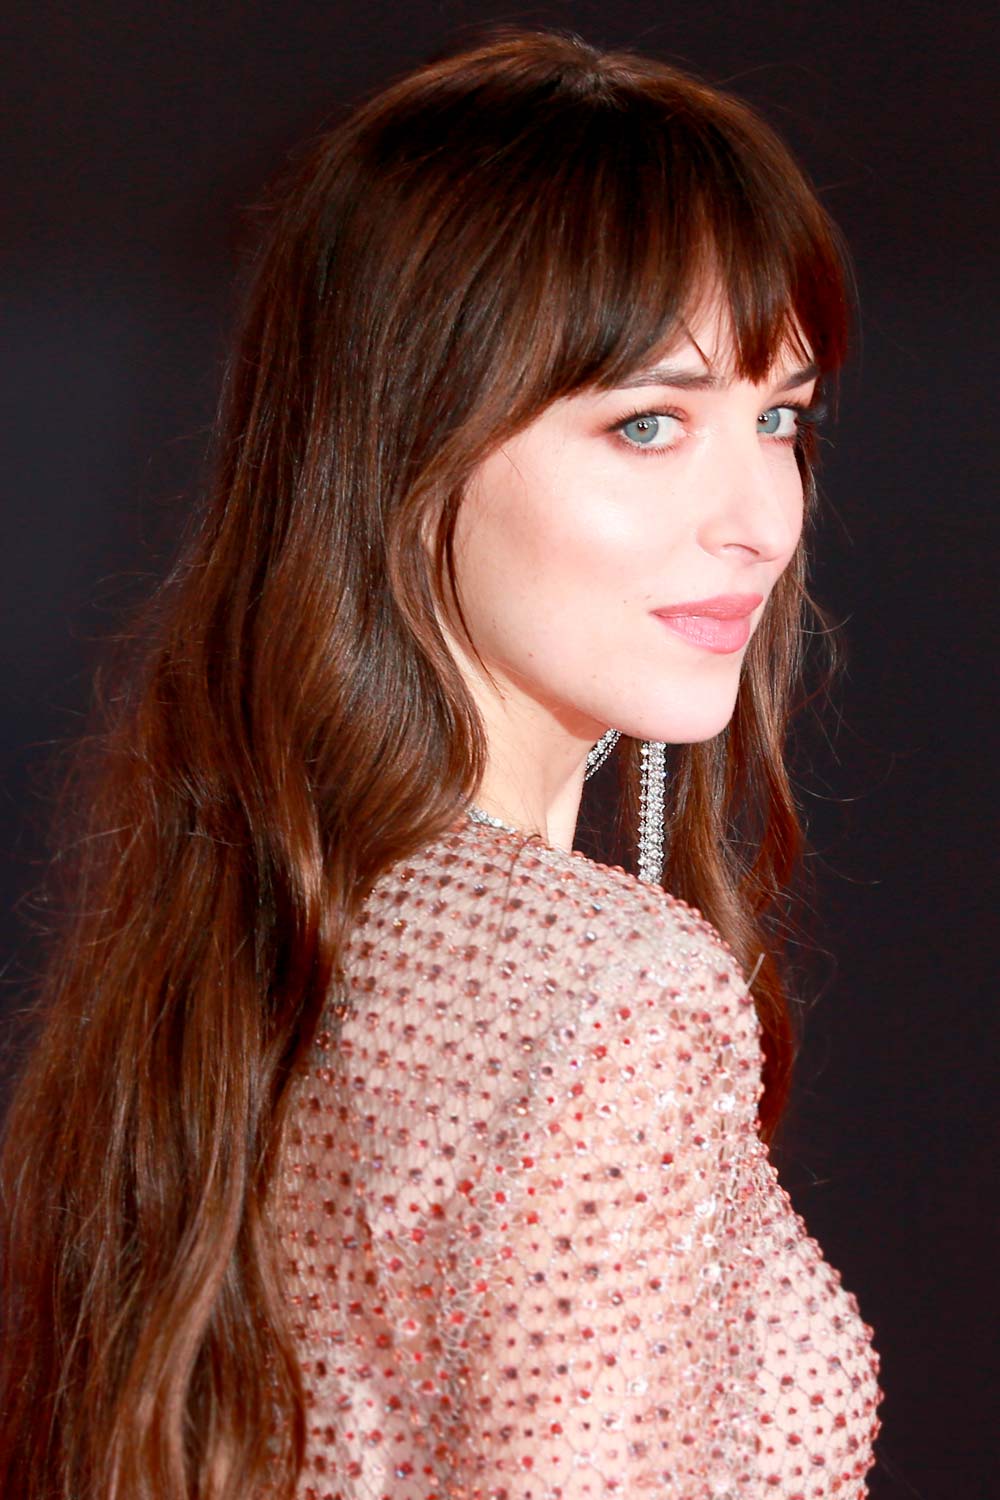 Just like how Dakota Johnson bottleneck bangs are being styled, there are so many ways to rock these popular bangs